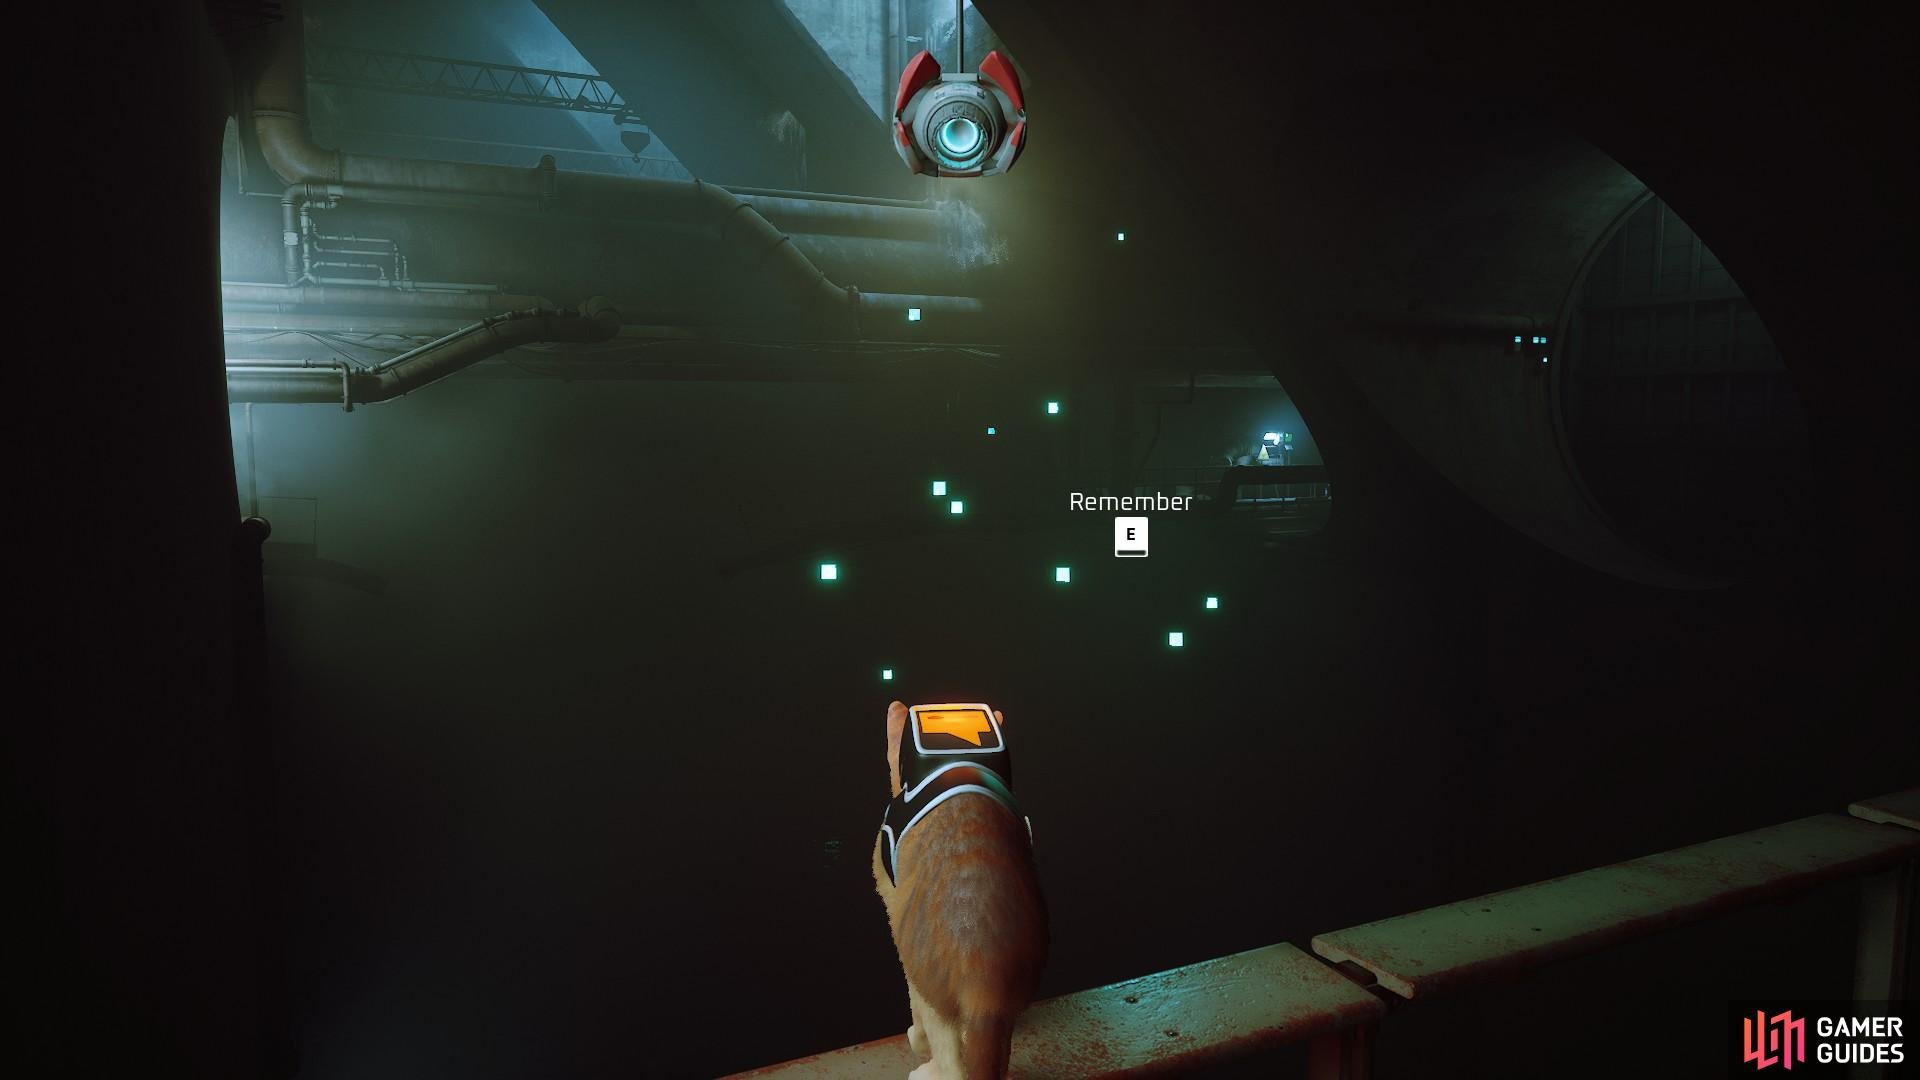 Once youre through the tunnel, jump on the ledge and get the first memory of the Sewers level.